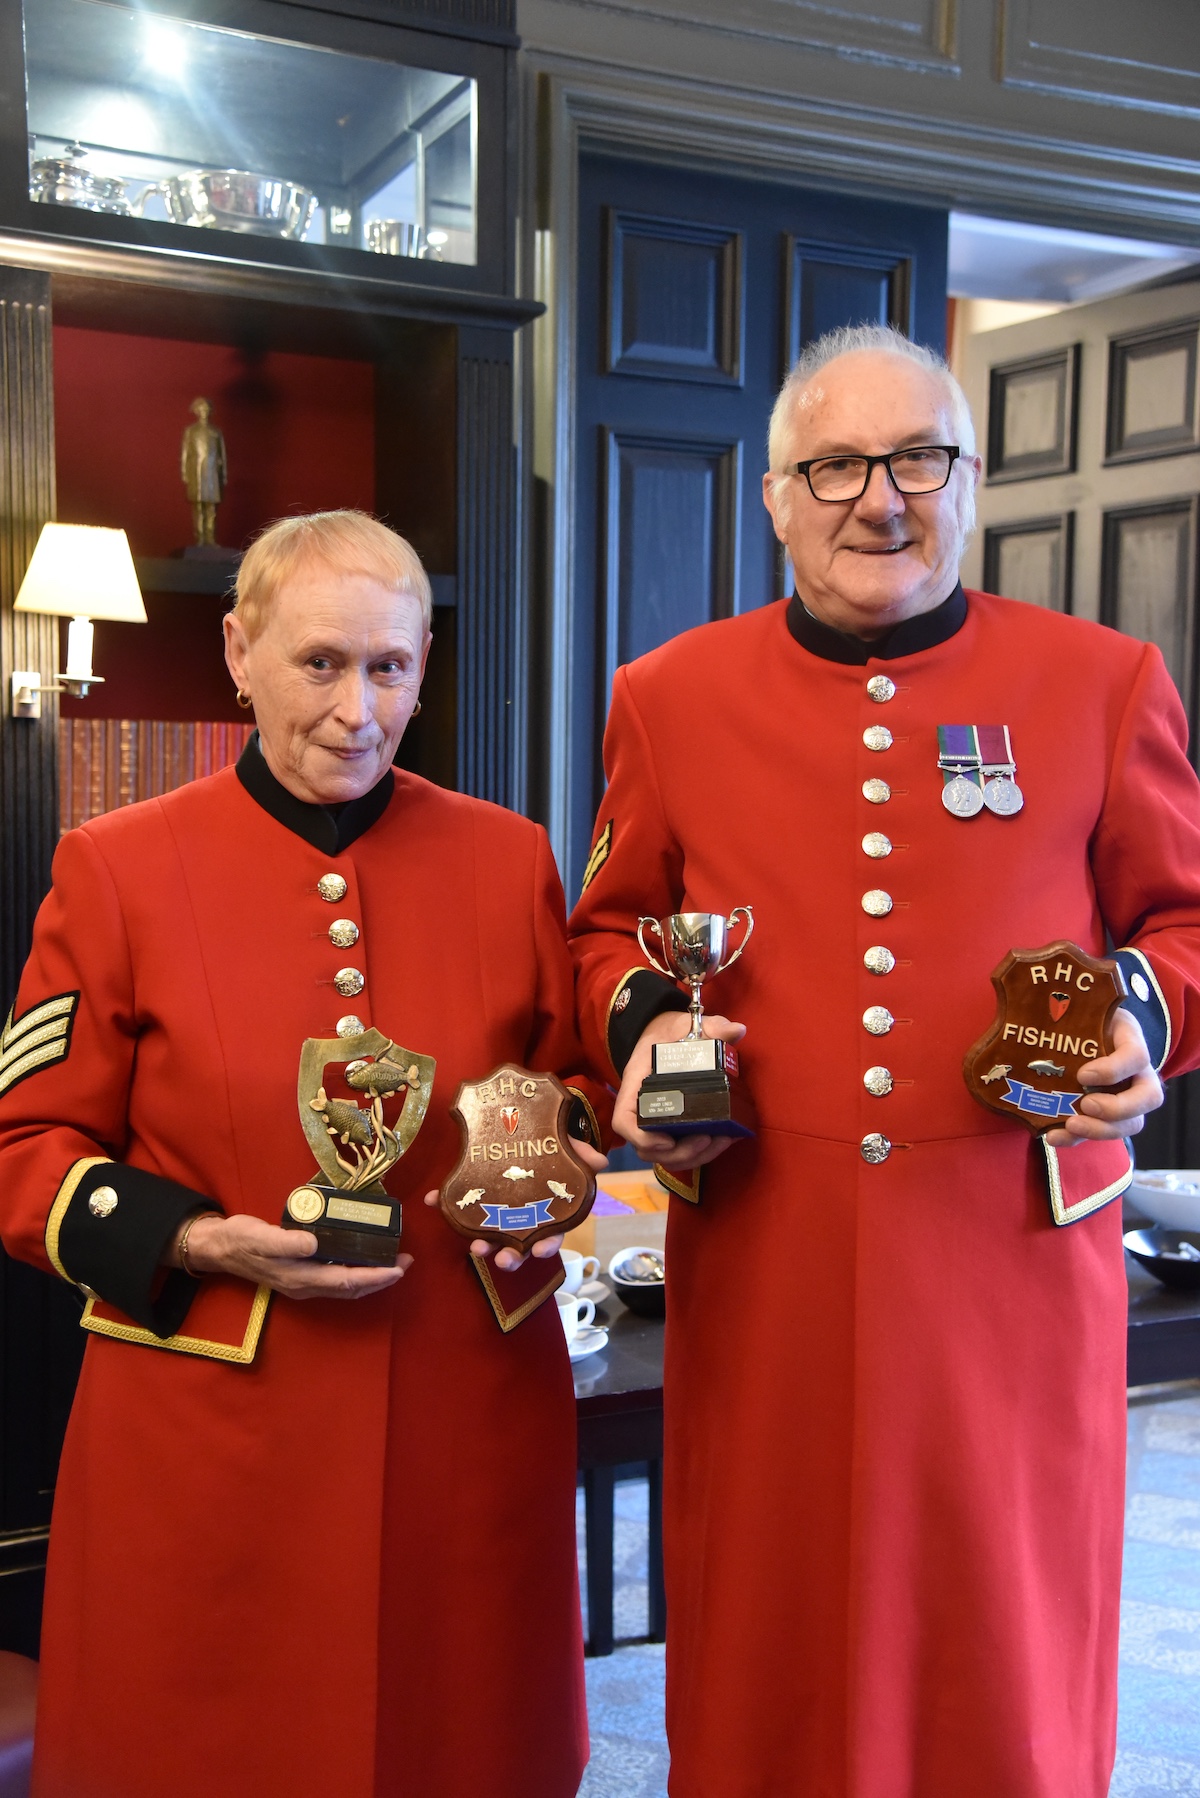 Chelsea Pensioners Ann Phipps (left) and David Lines (right) holding their fishing club award